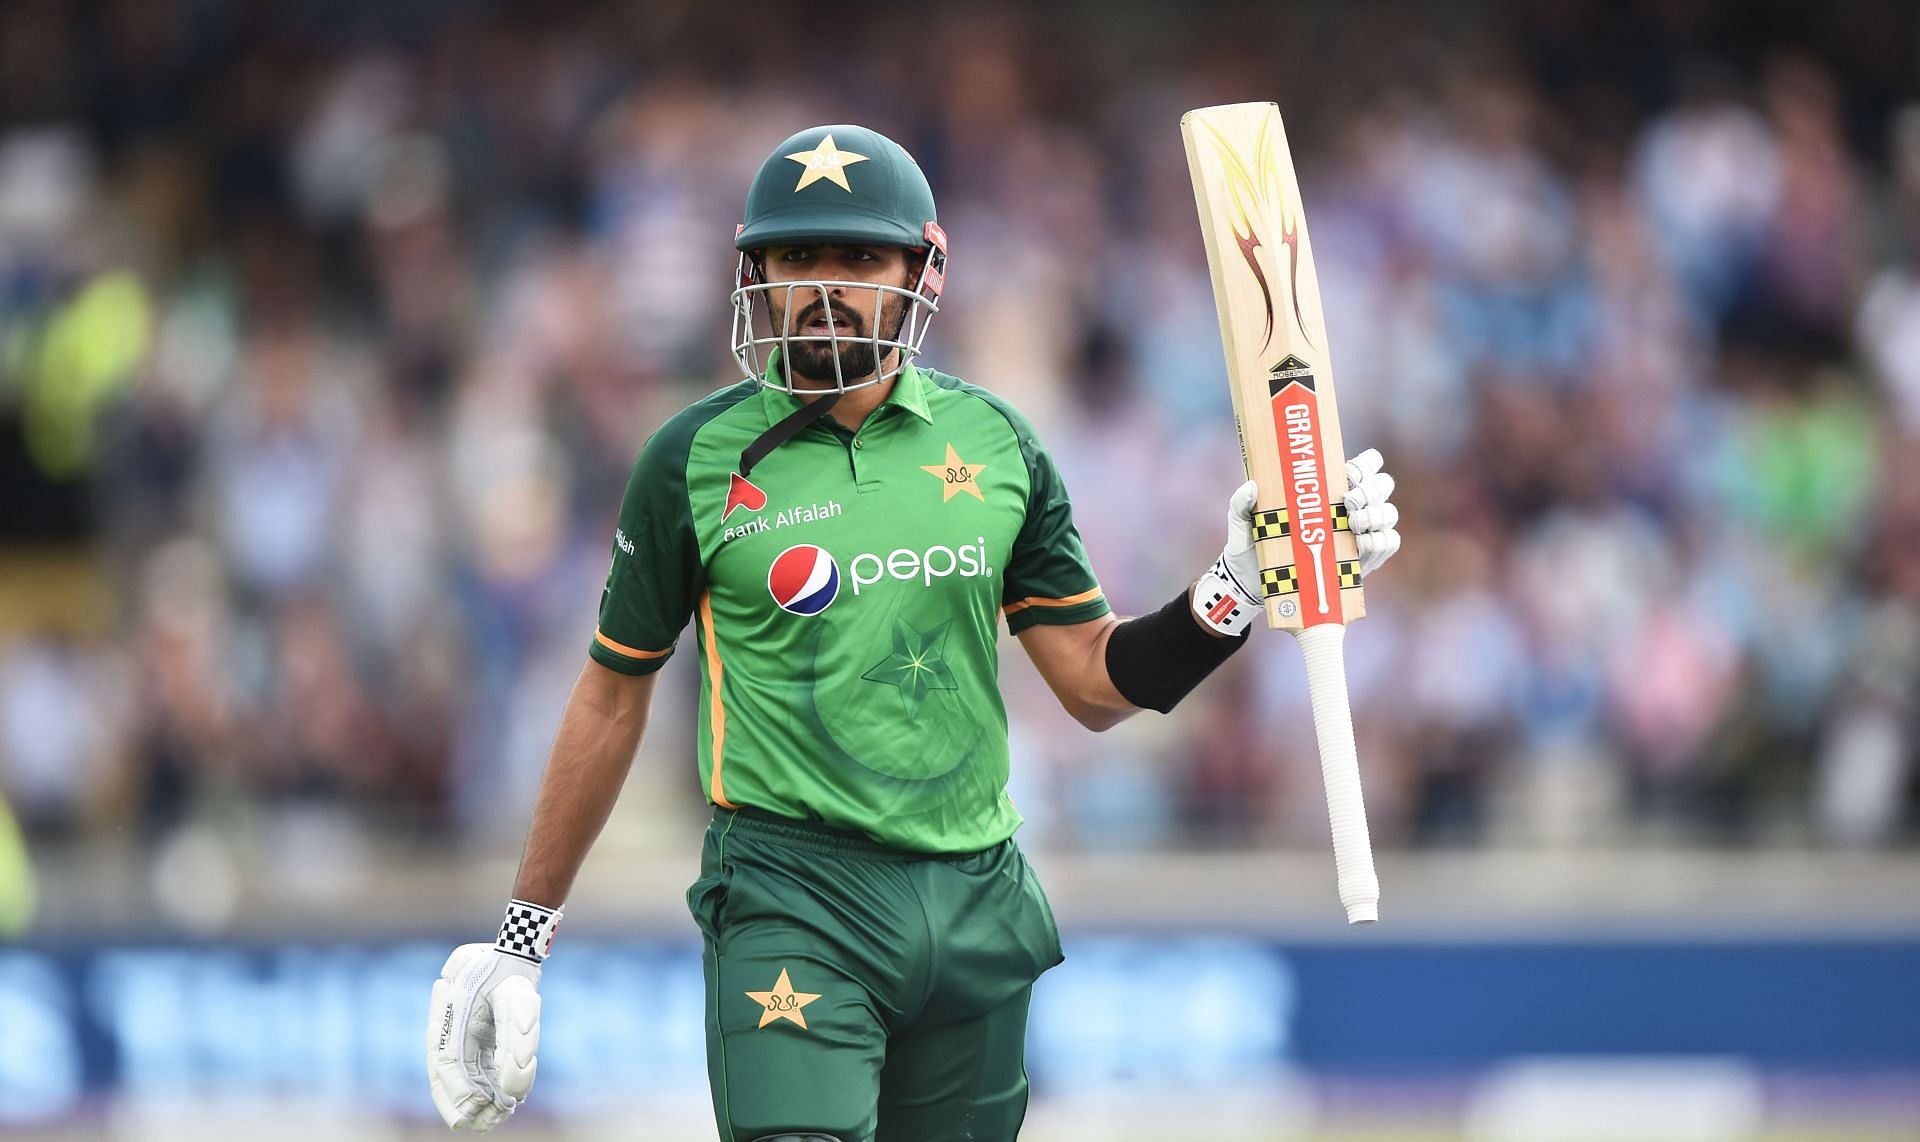 Babar Azam has played a lot of white-ball cricket in 2021